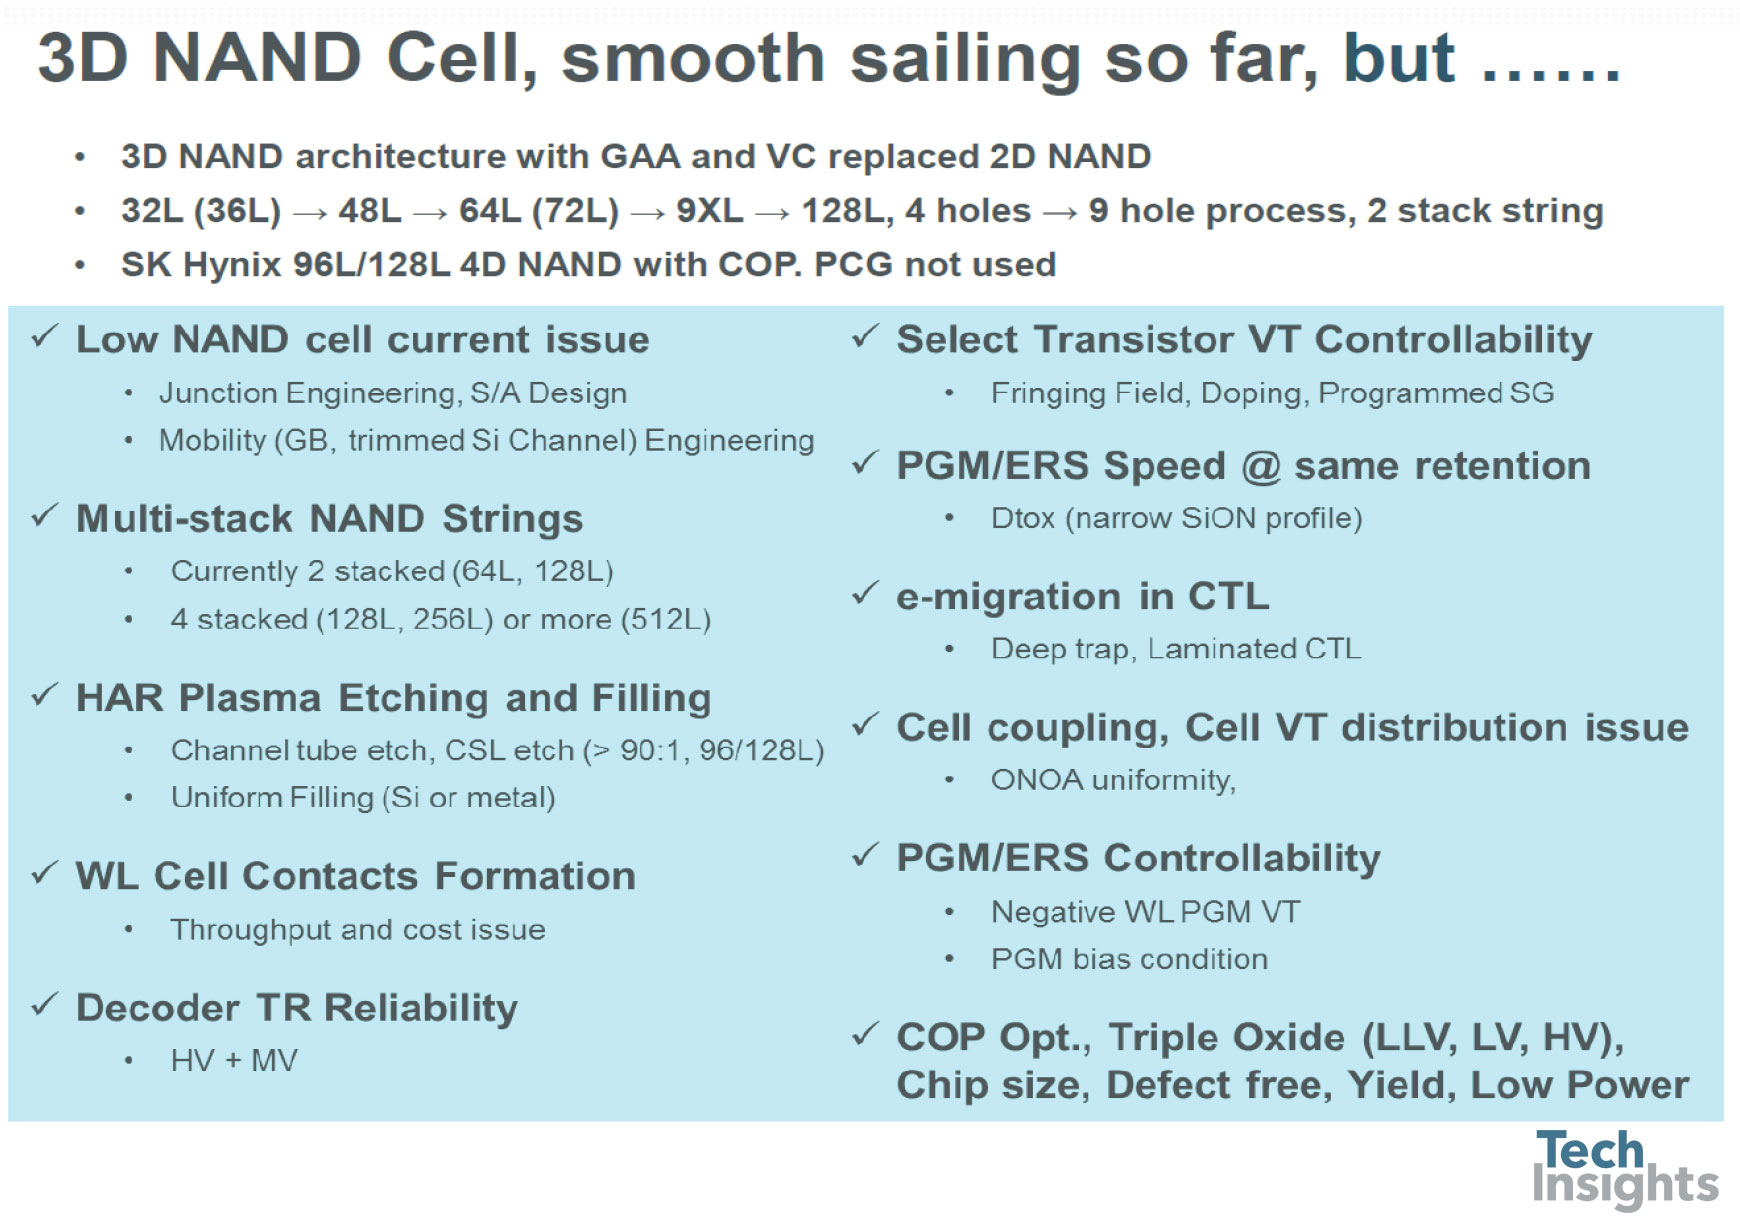 3D NAND cell, smooth sailing so far, but…